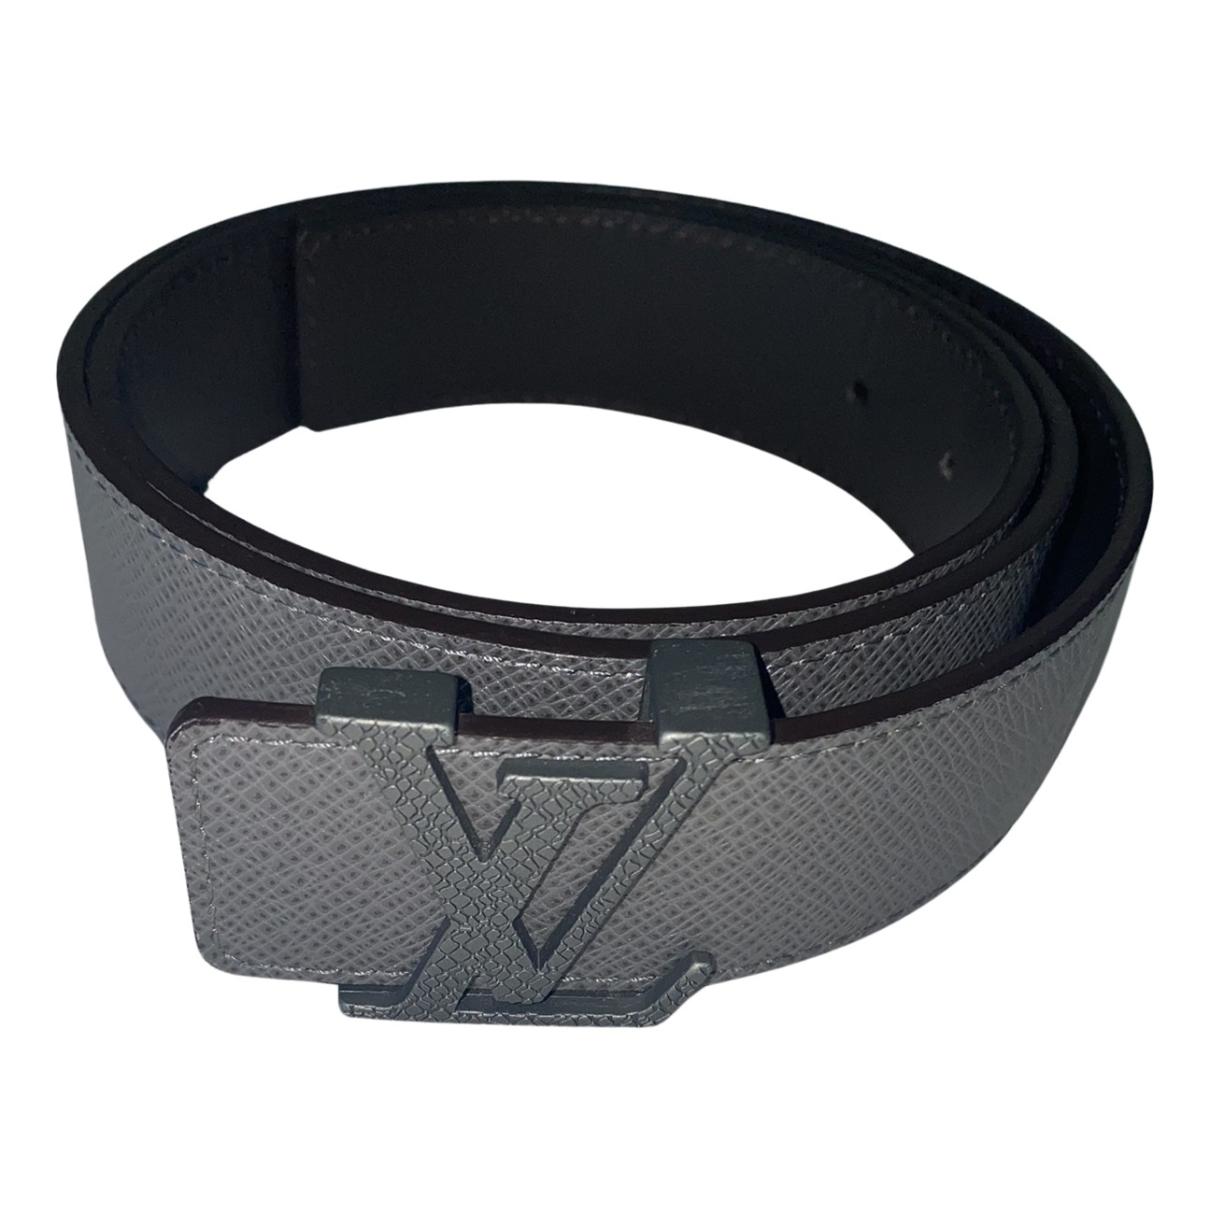 Leather belt Louis Vuitton Black size 90 cm in Leather - 35946303